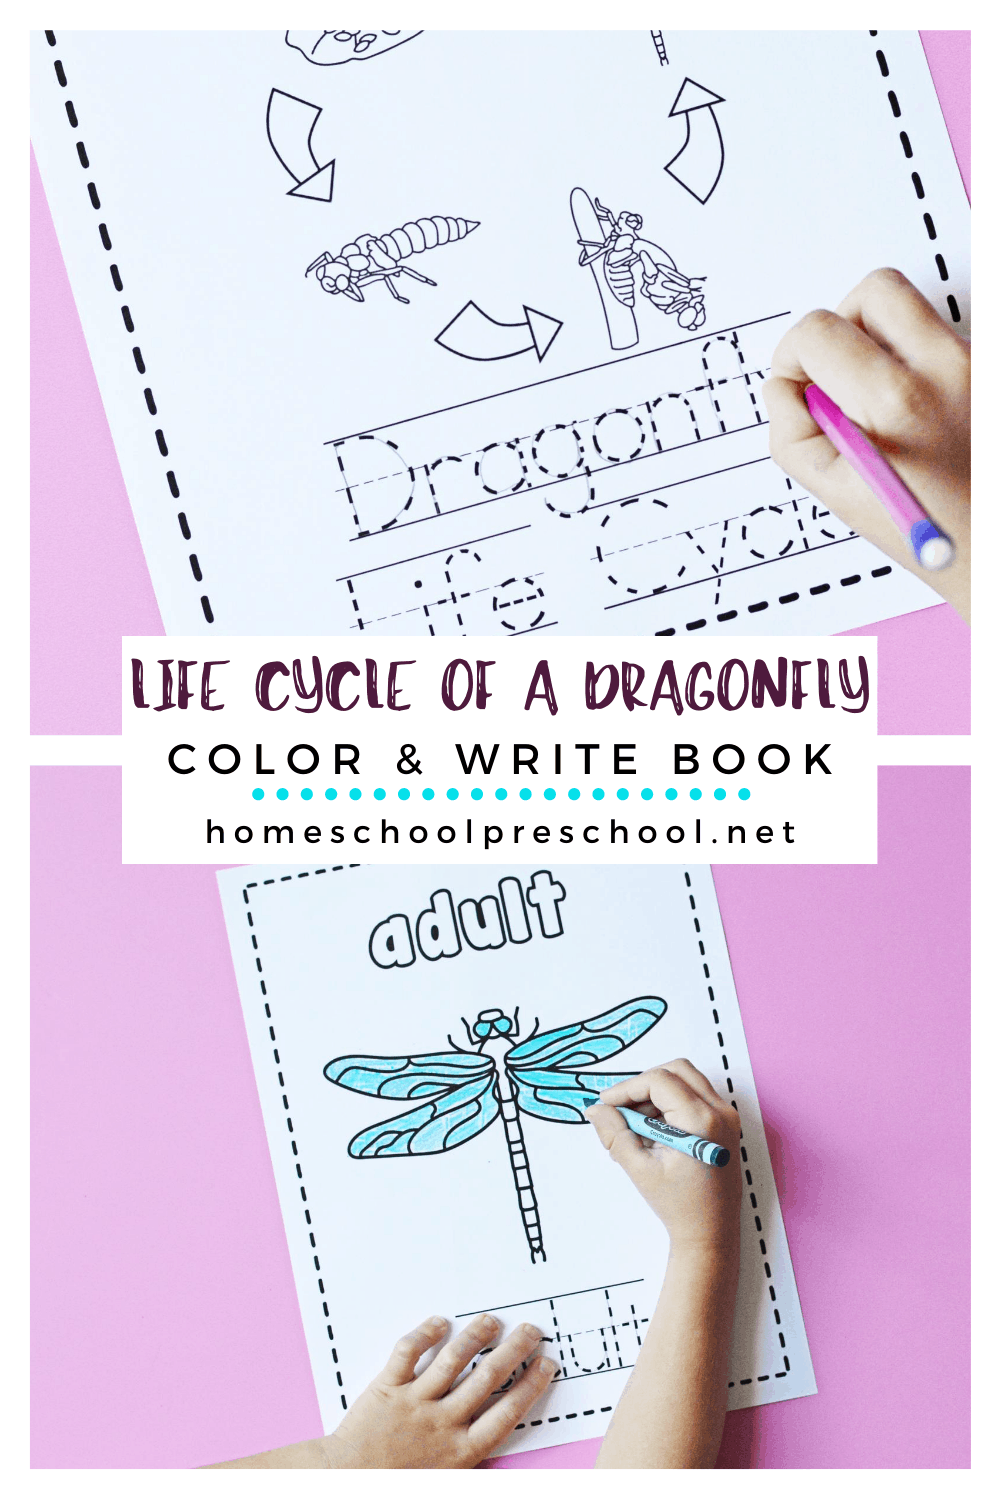 The Life Cycle of a Dragonfly Coloring Book